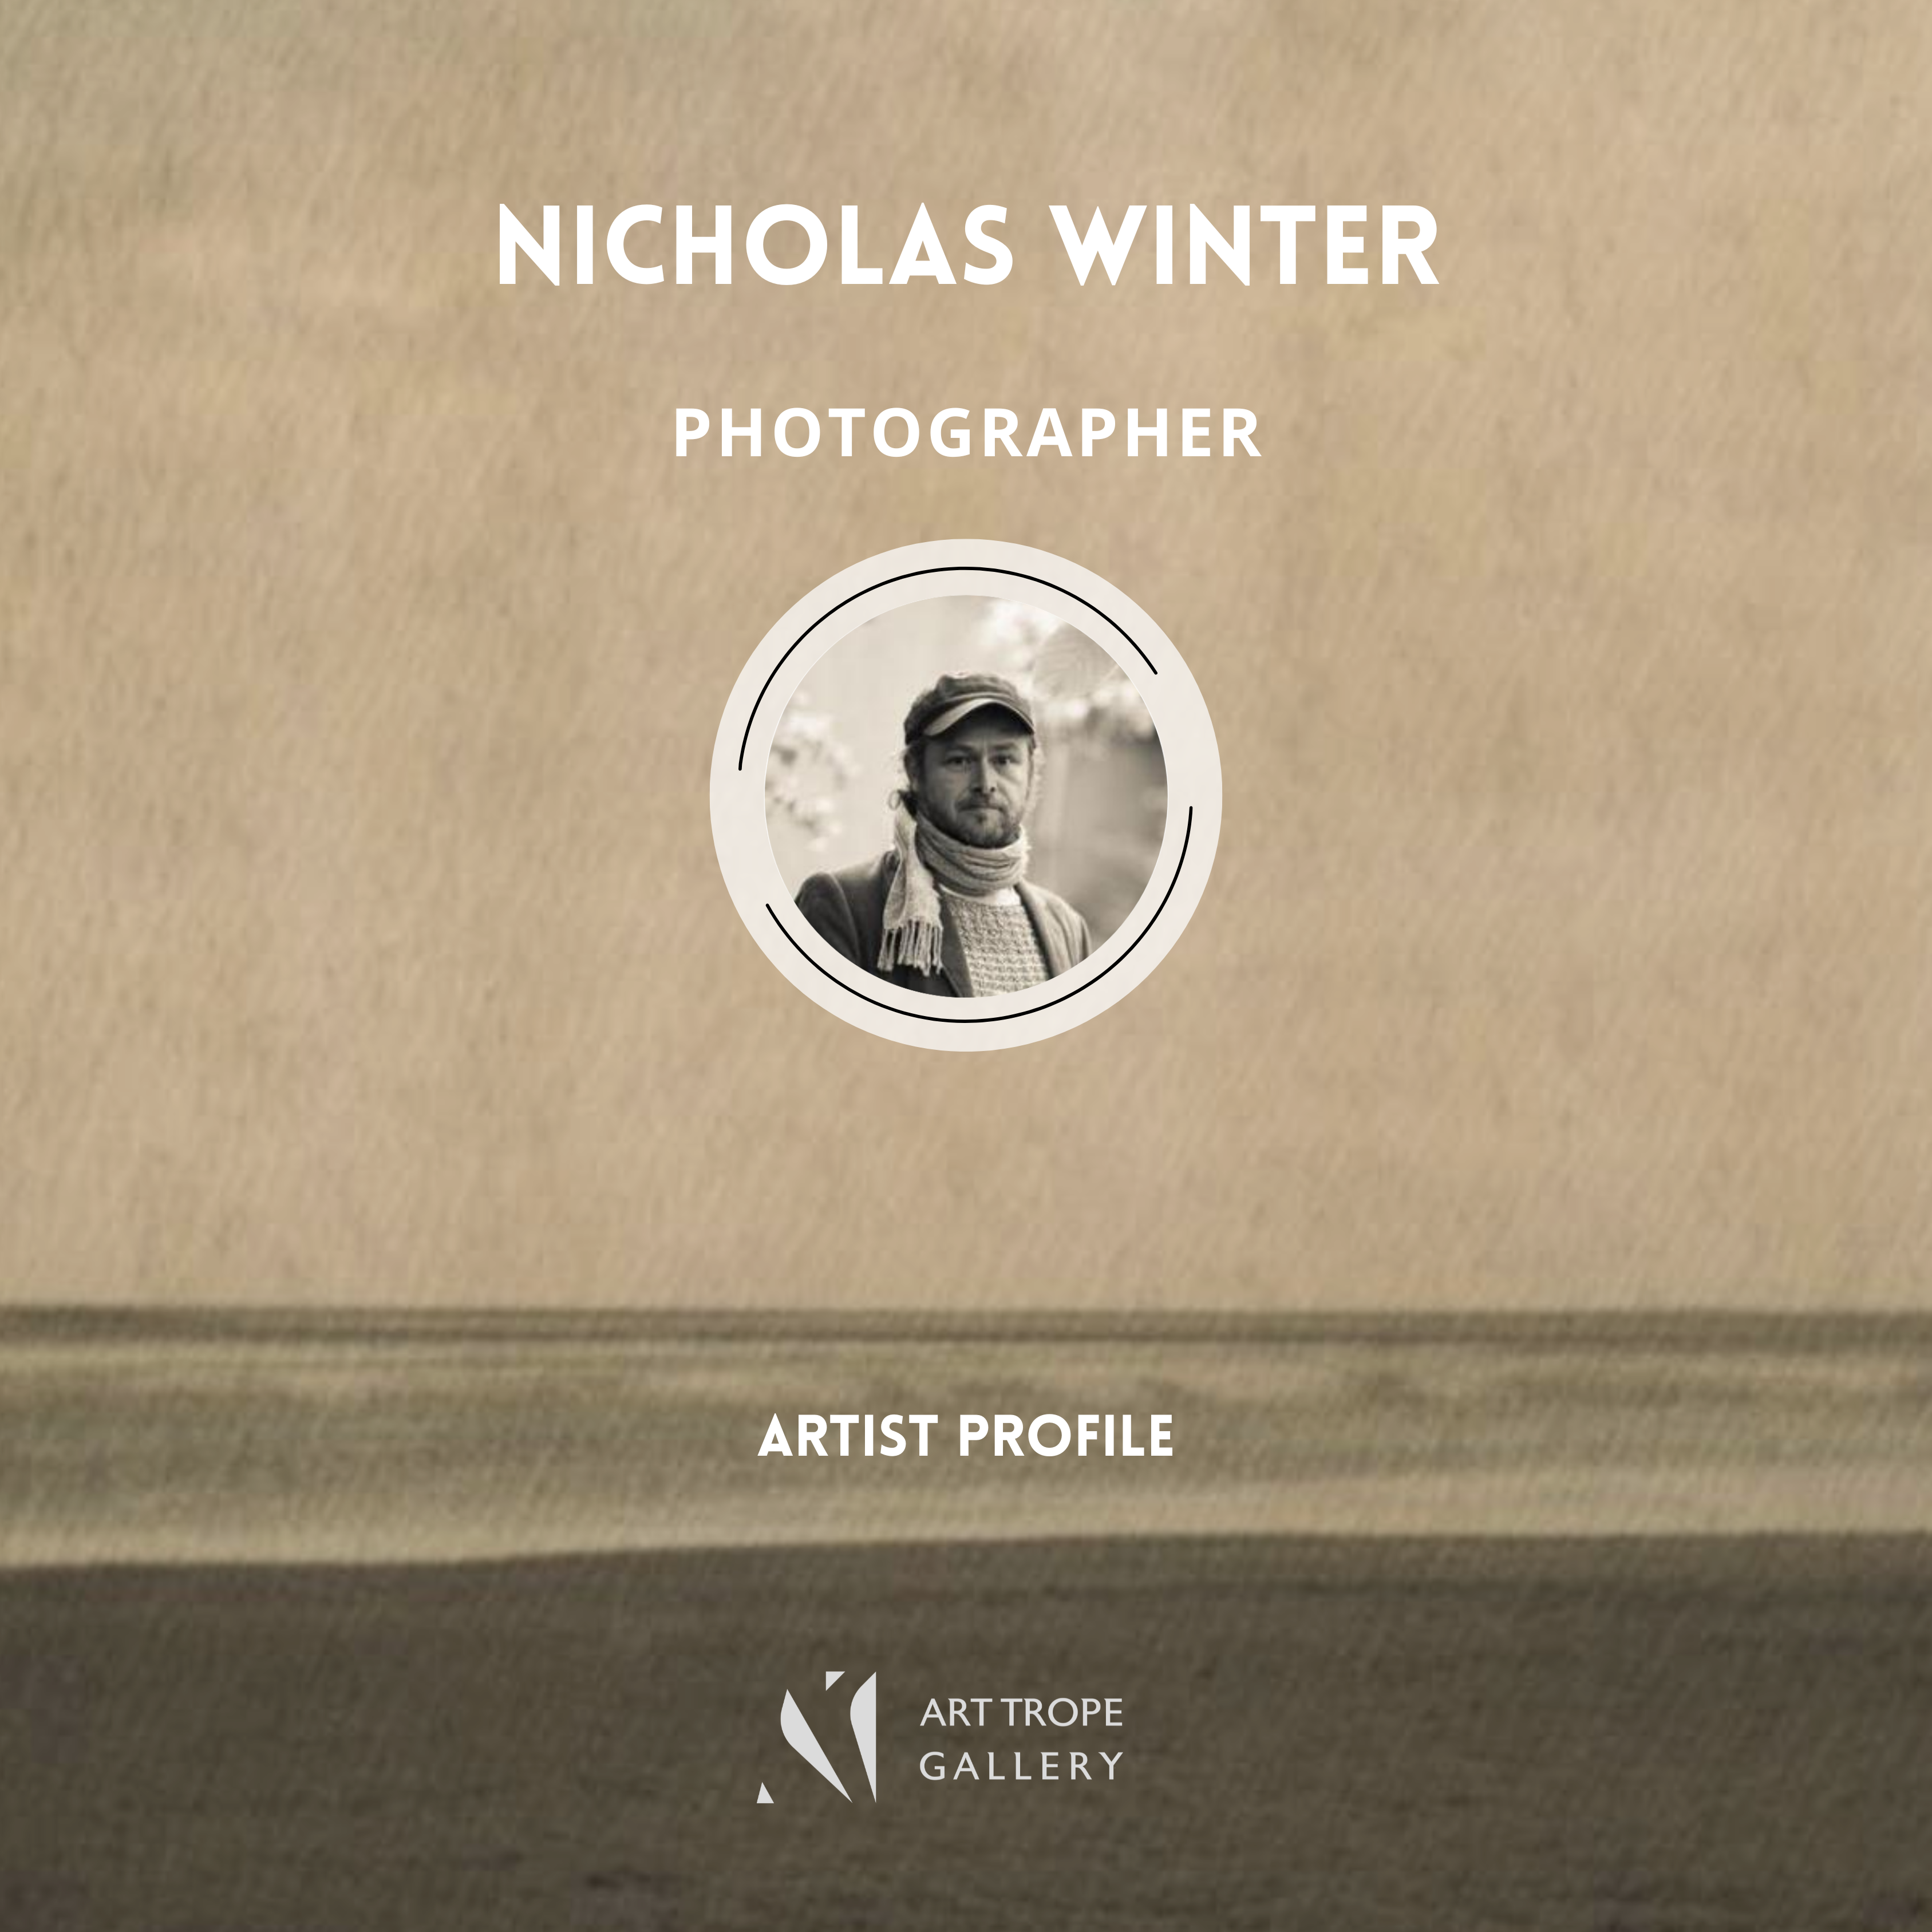 Art Trope Gallery features Photographer Nicholas Winter in a dedicated article!